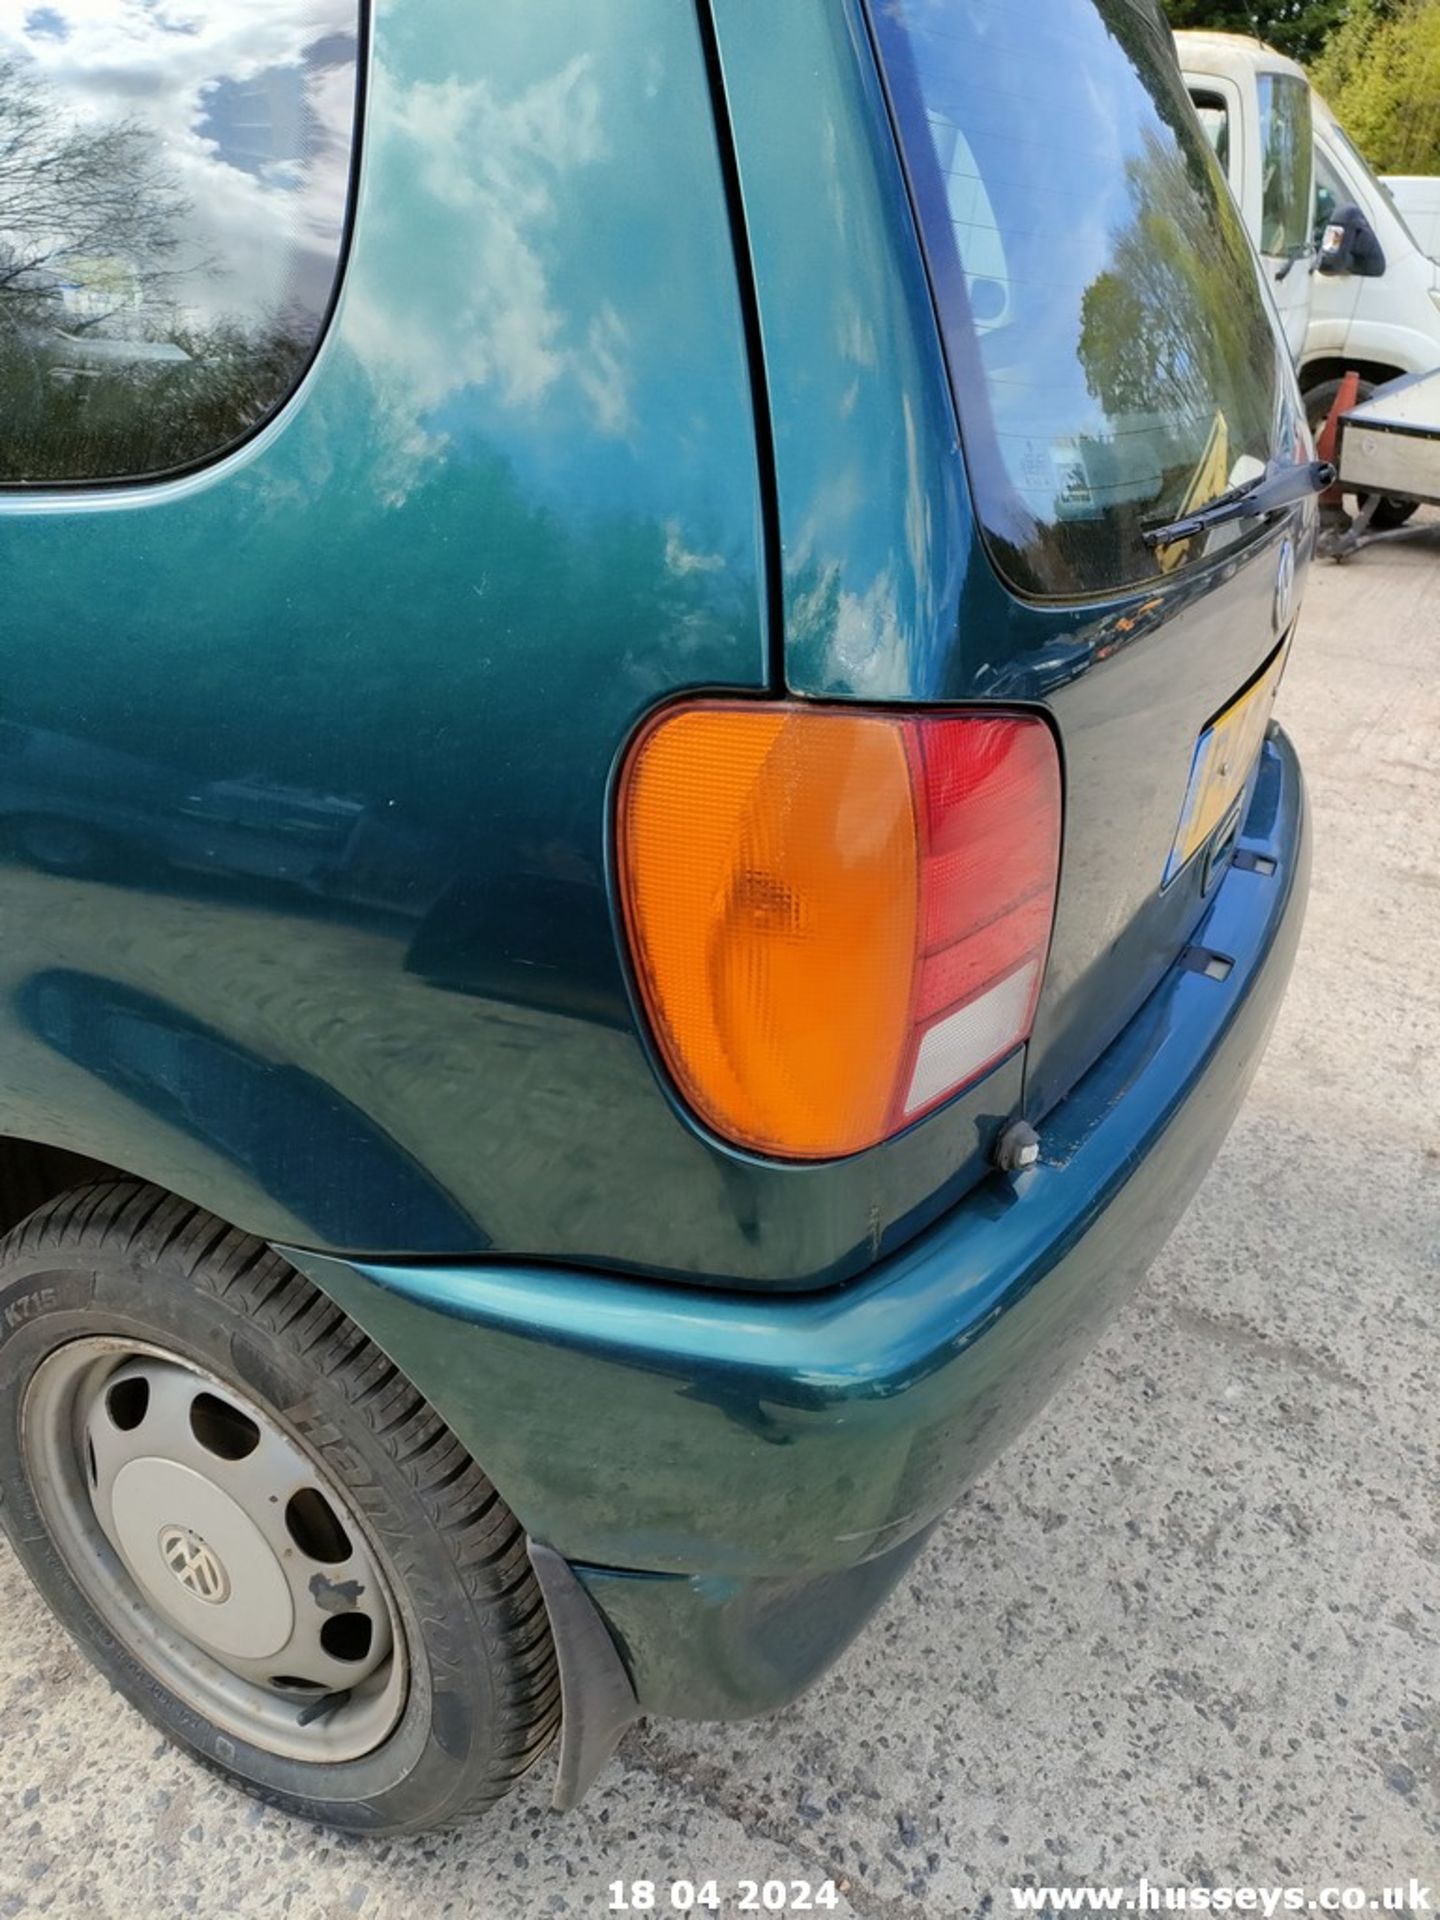 1997 VOLKSWAGEN POLO 1.4 CL AUTO - 1390cc 3dr Hatchback (Green, 68k) - Image 27 of 60